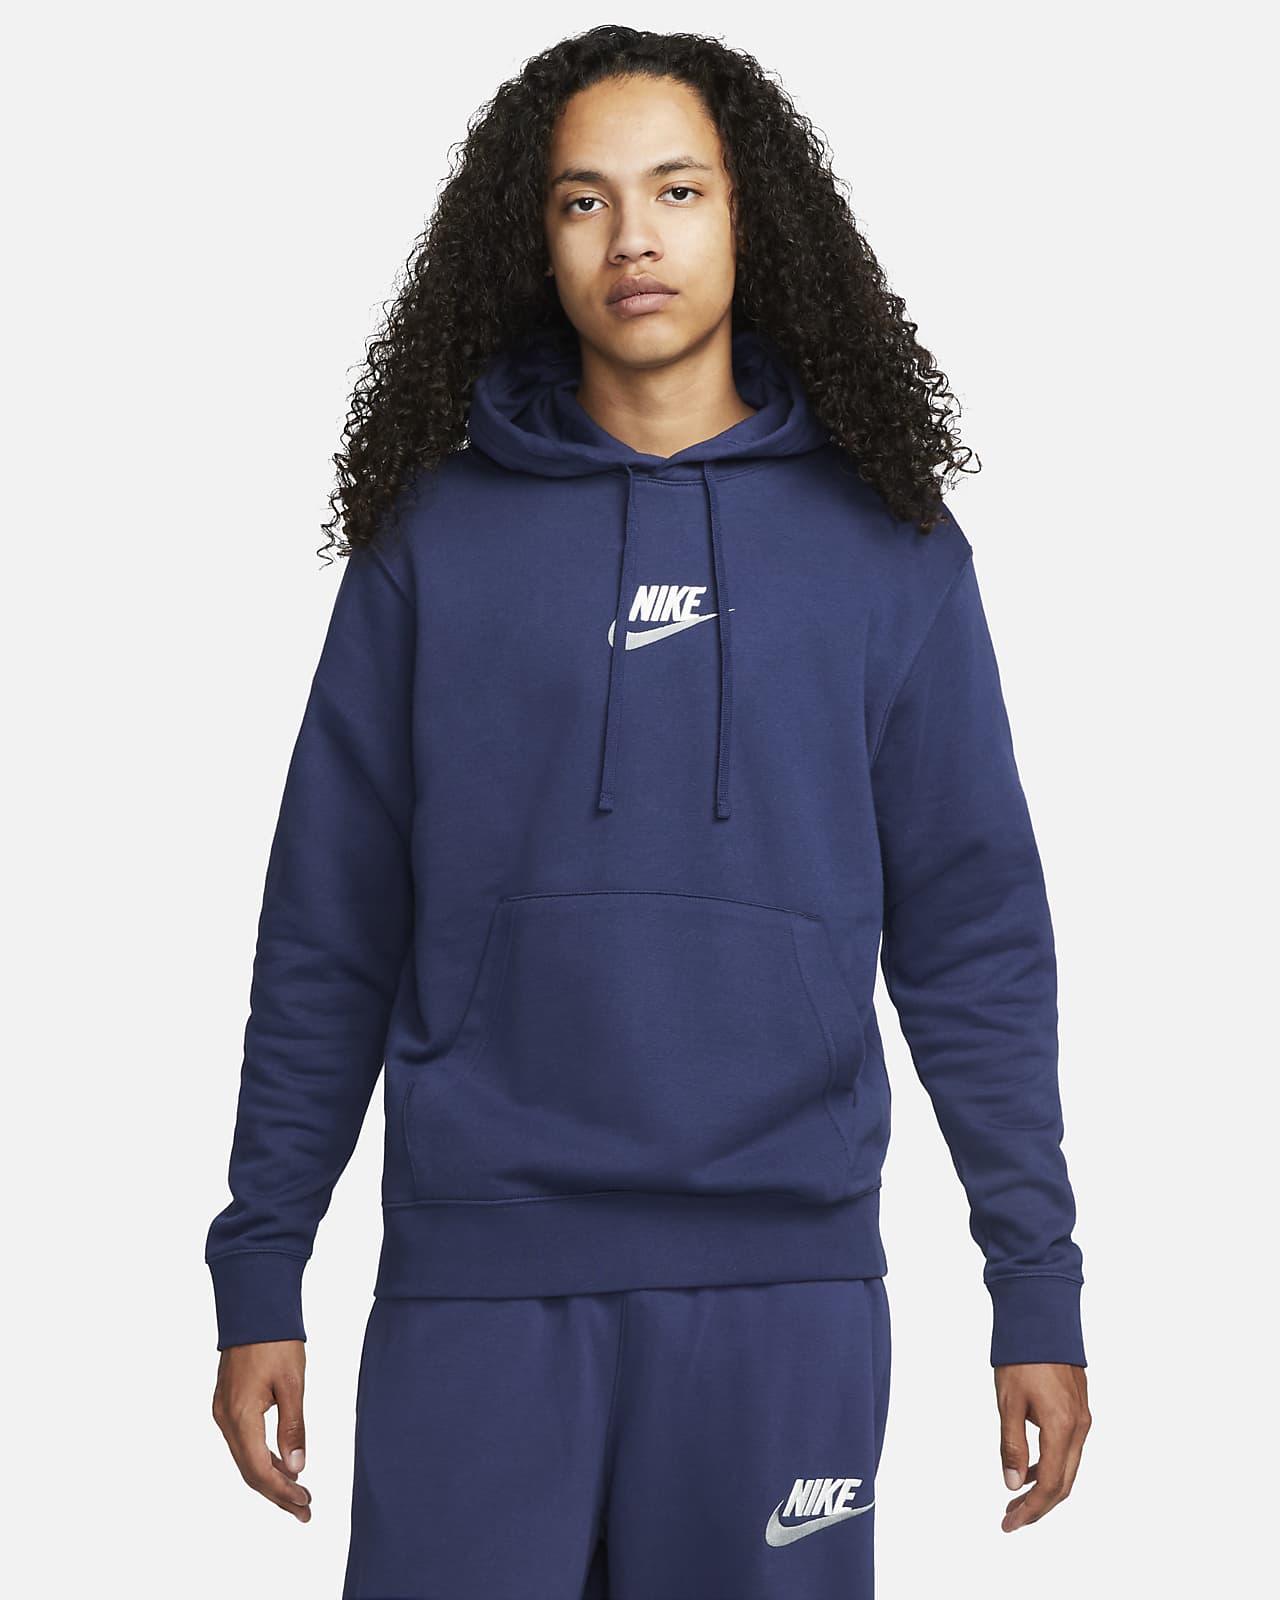 Nike 'Join the Club' Pullover Younger Kids Hoodie. Nike LU